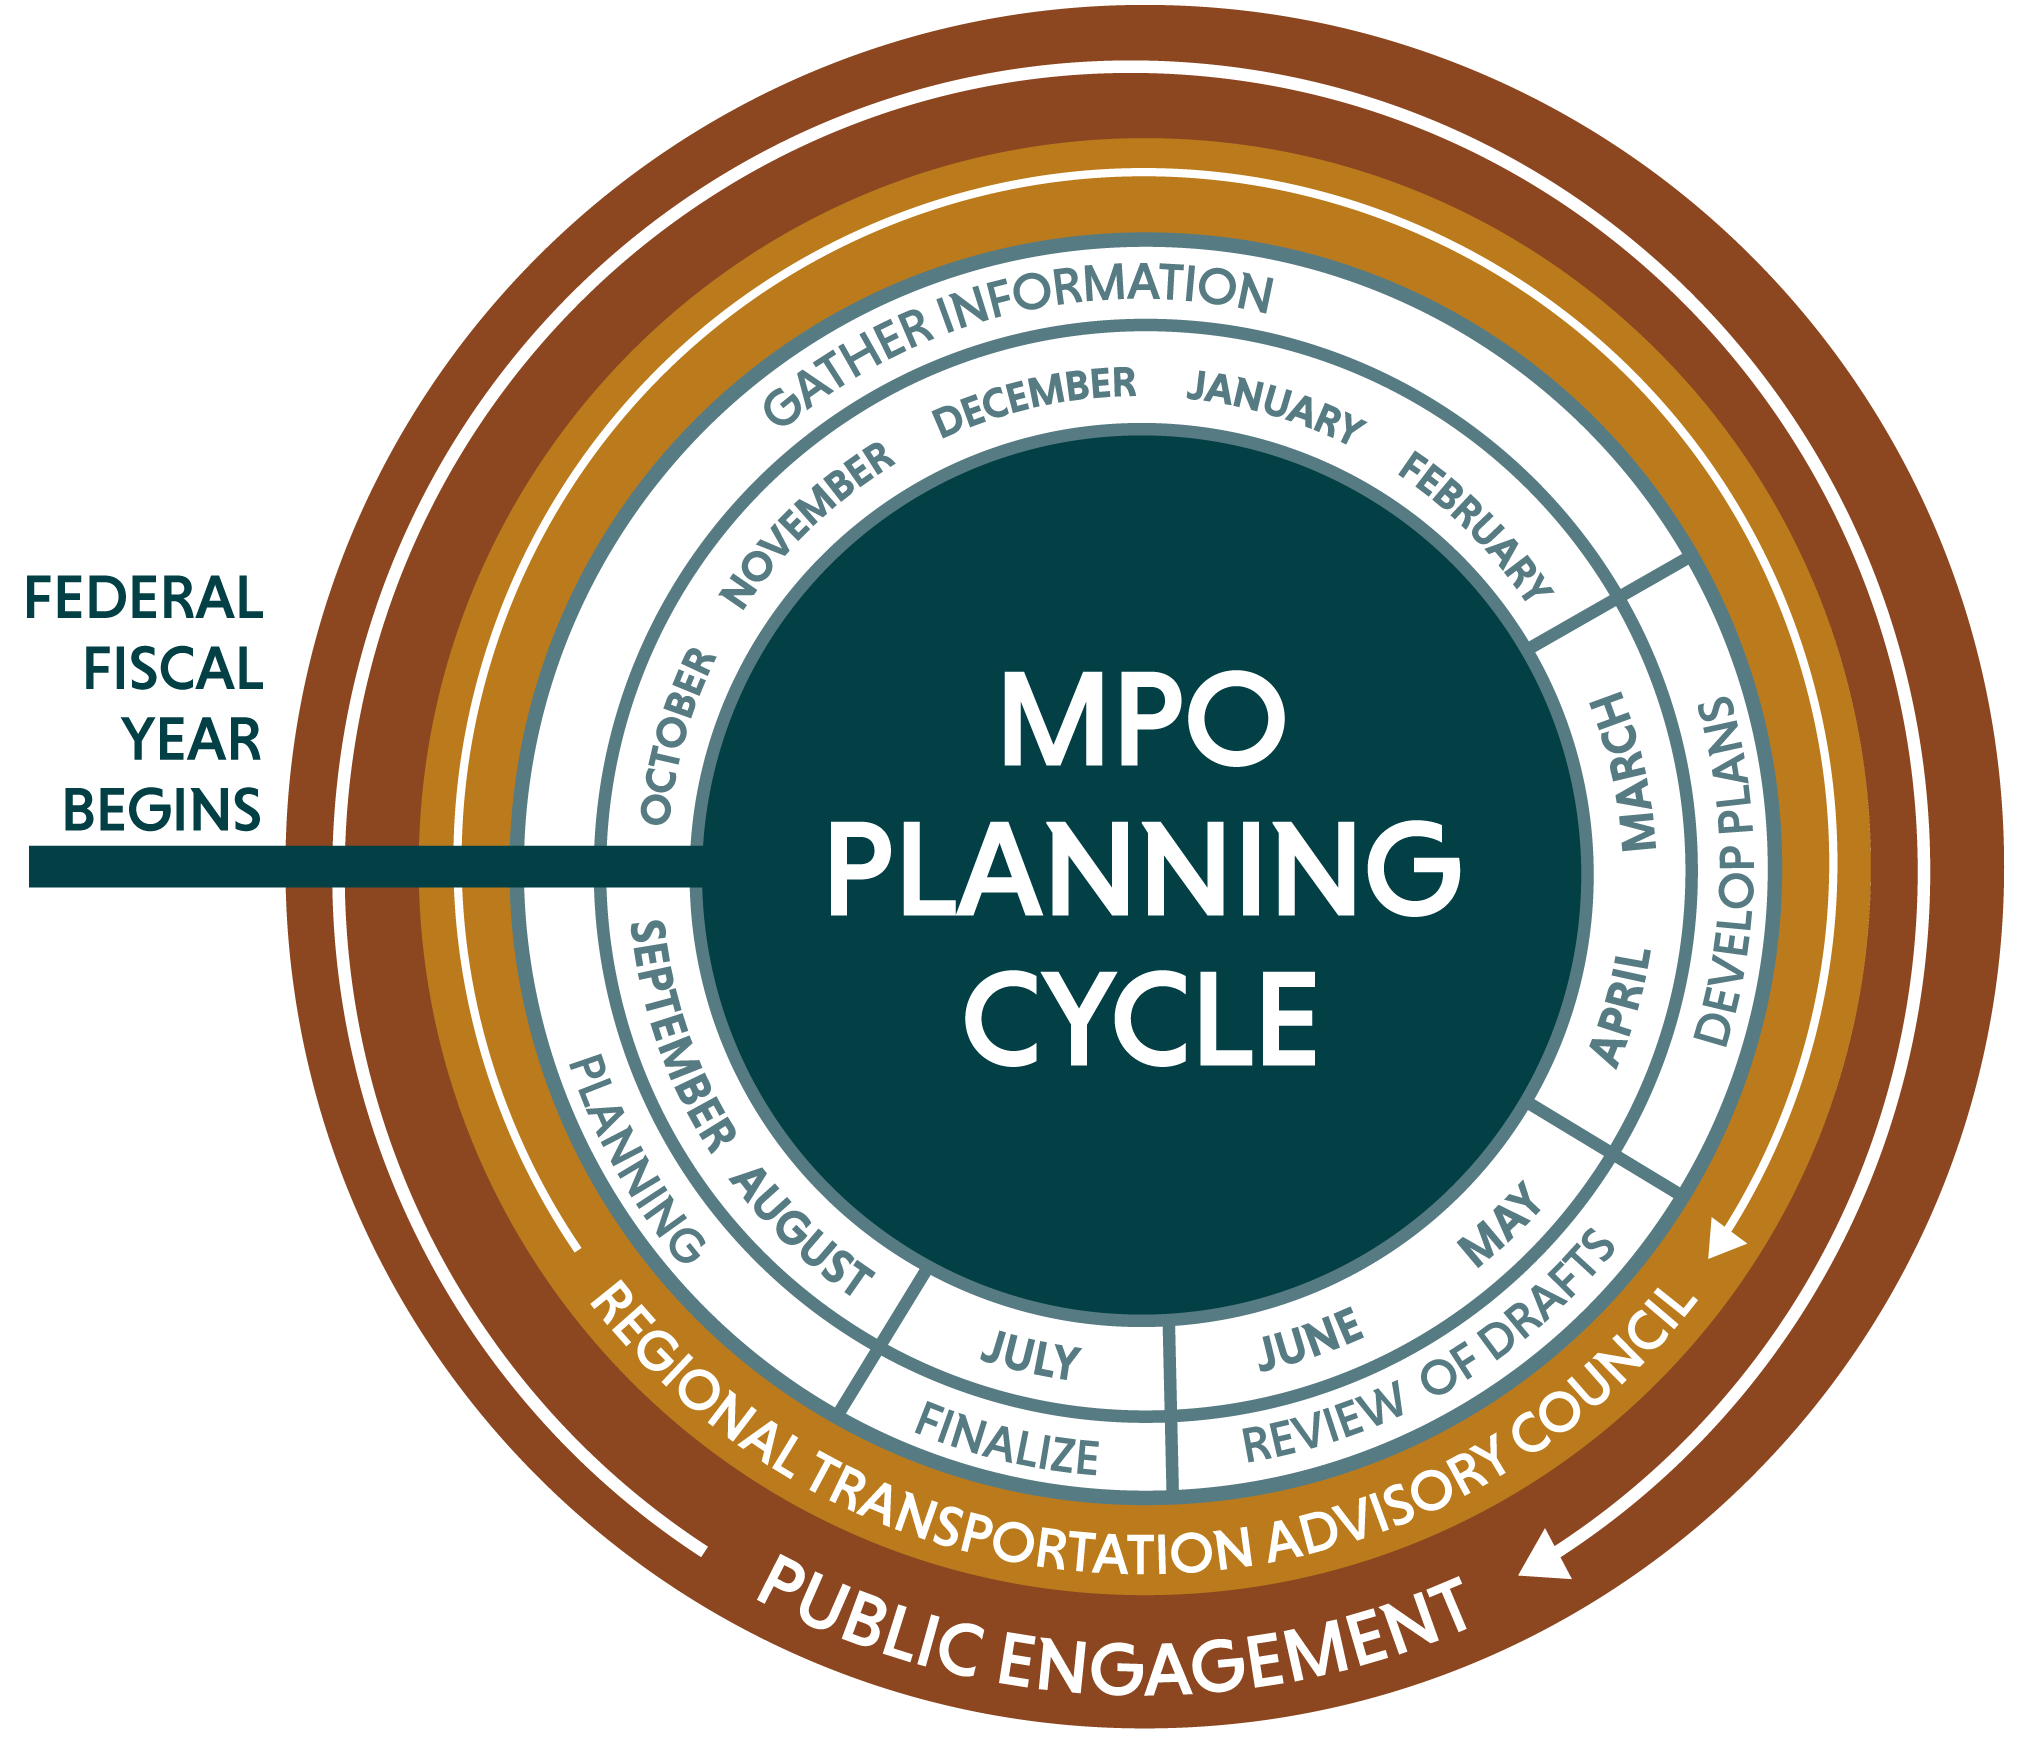 Circular diagram illustrating the MPO planning cycle: from October through February, the MPO gathers information. From March through April, the MPO develops plans. From May through June, drafts are reviewed, and documents are endorsed in July. The annual process is reviewed from August through September. Public engagement and the Regional Transportation Advisory Council encompass the cycle and are active in each element throughout the FFY. 
